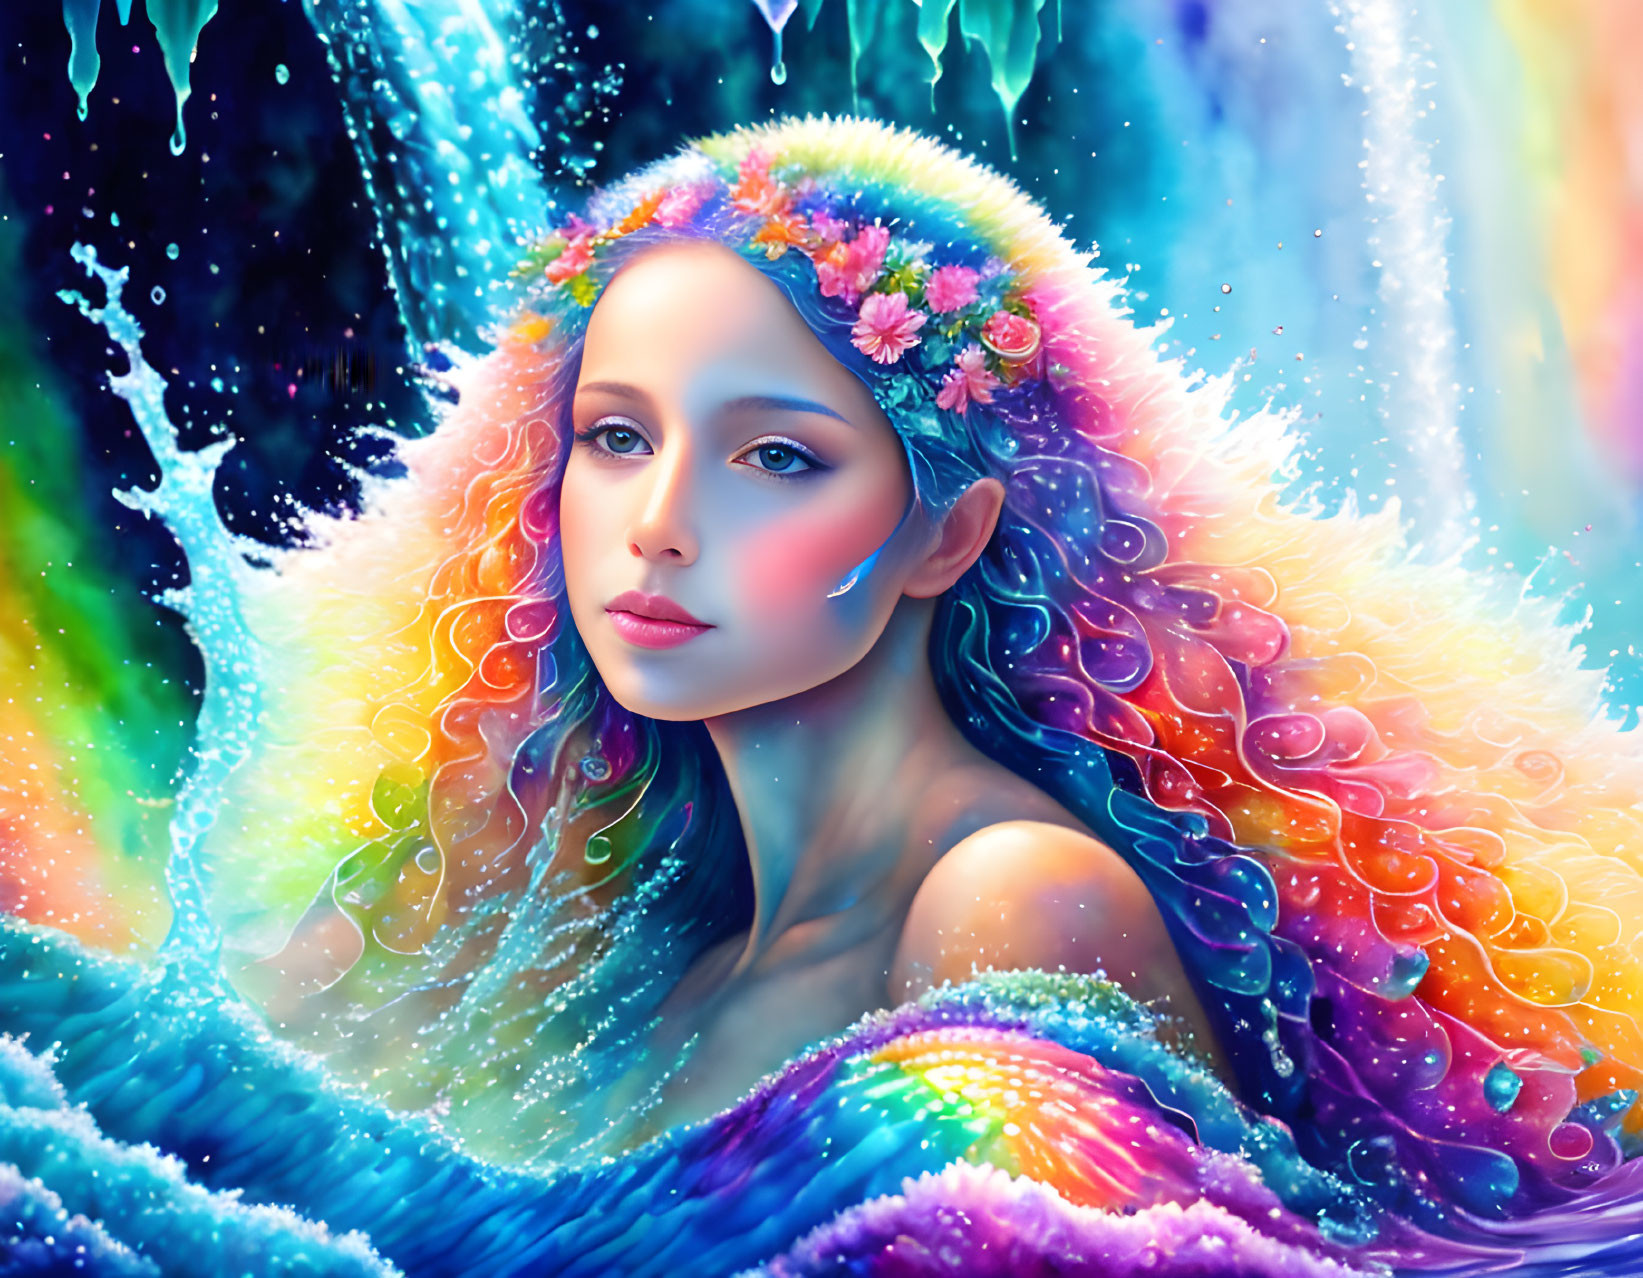 Vibrant digital painting of woman with curly hair and floral adornments